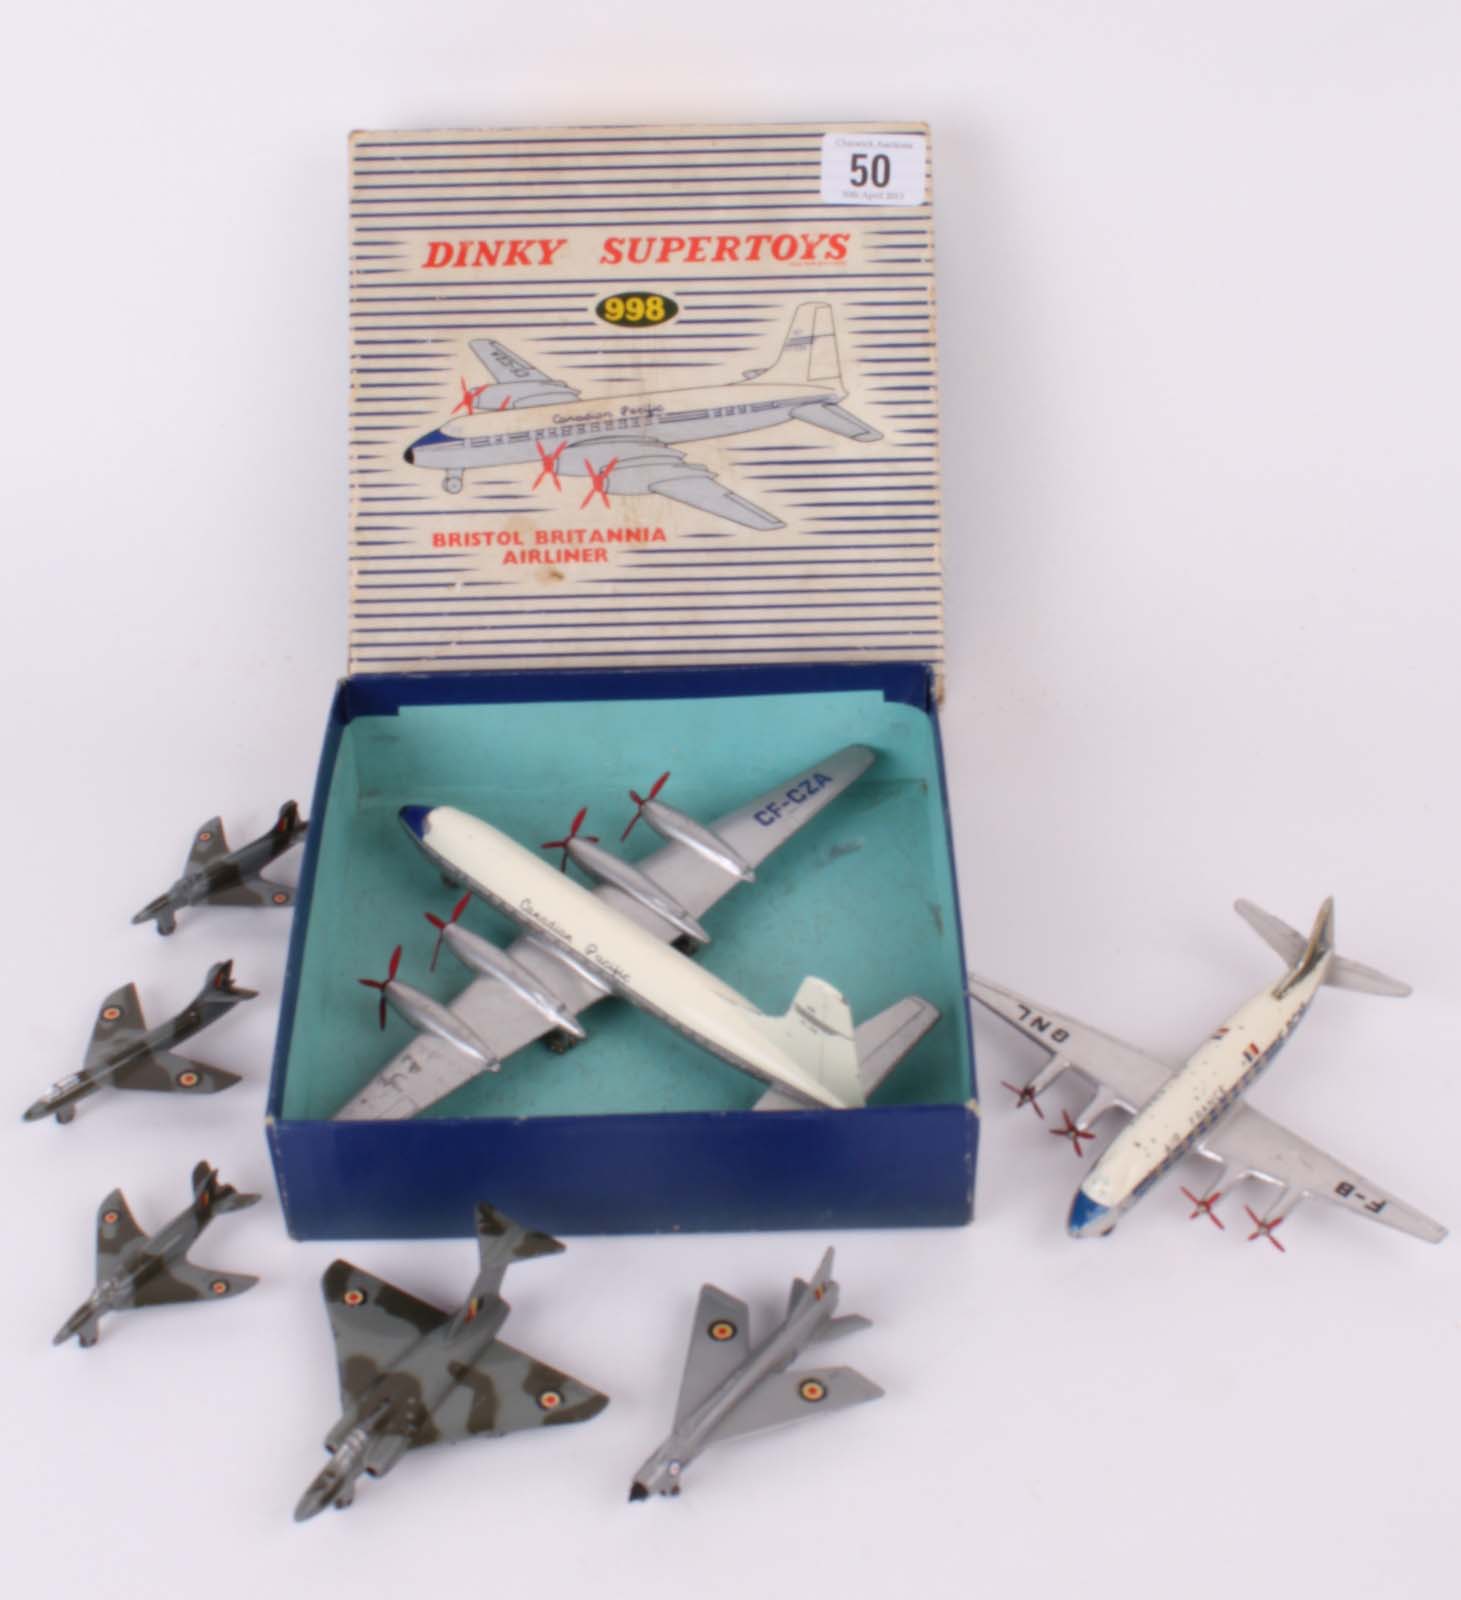 A Dinky Supertoys (998) Bristol Britannia Airliner, boxed, by Meccano with six unboxed Dinky